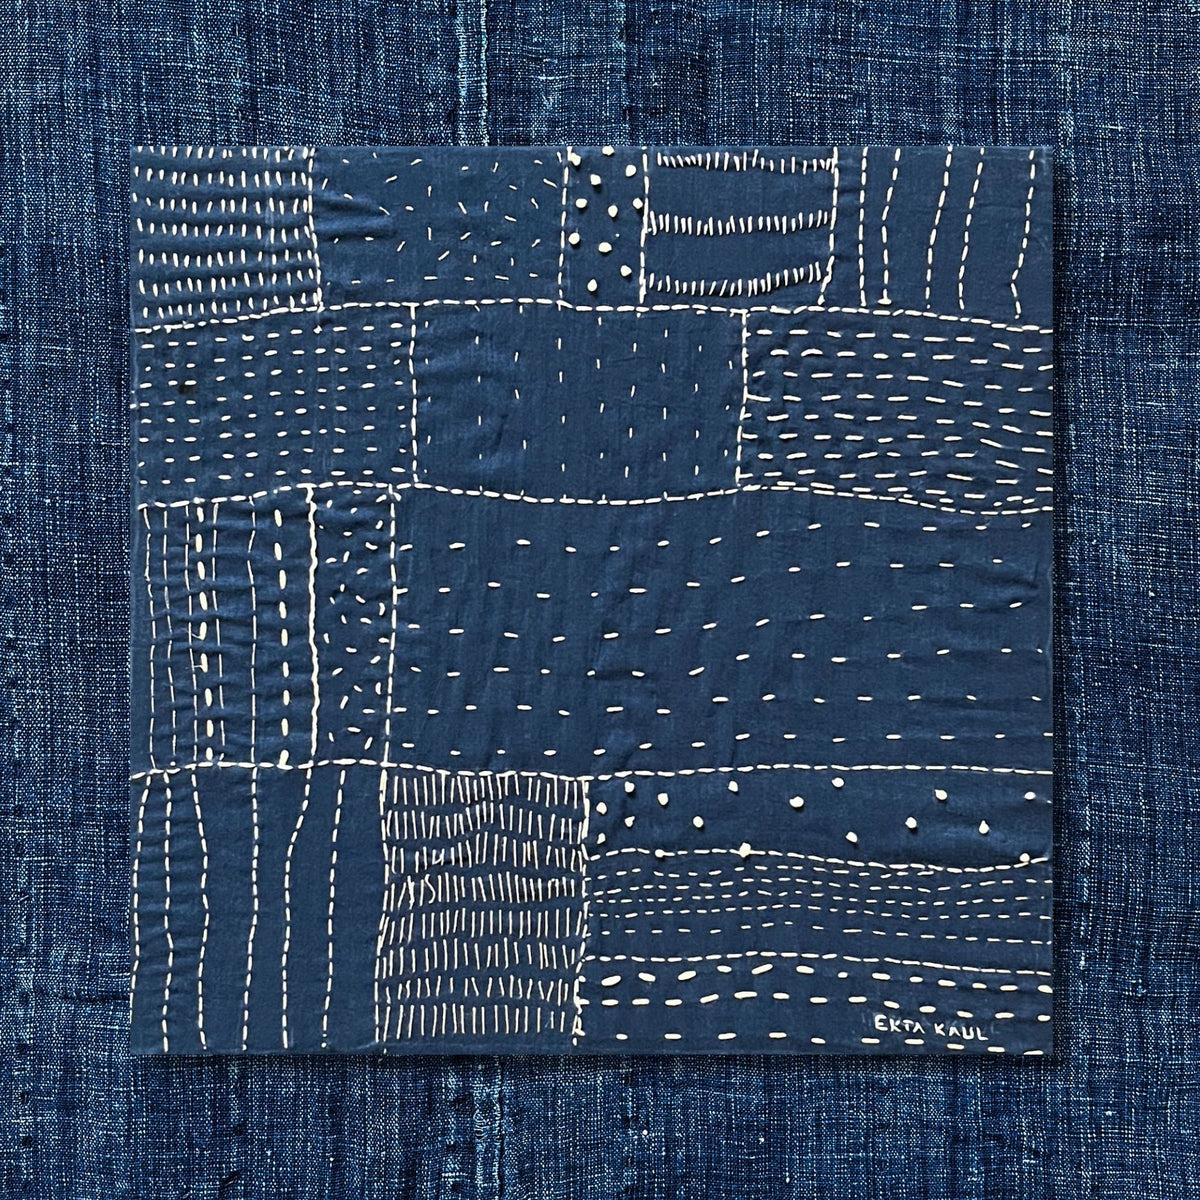 Hand-Sewn Quilting Series I: a six week exploration